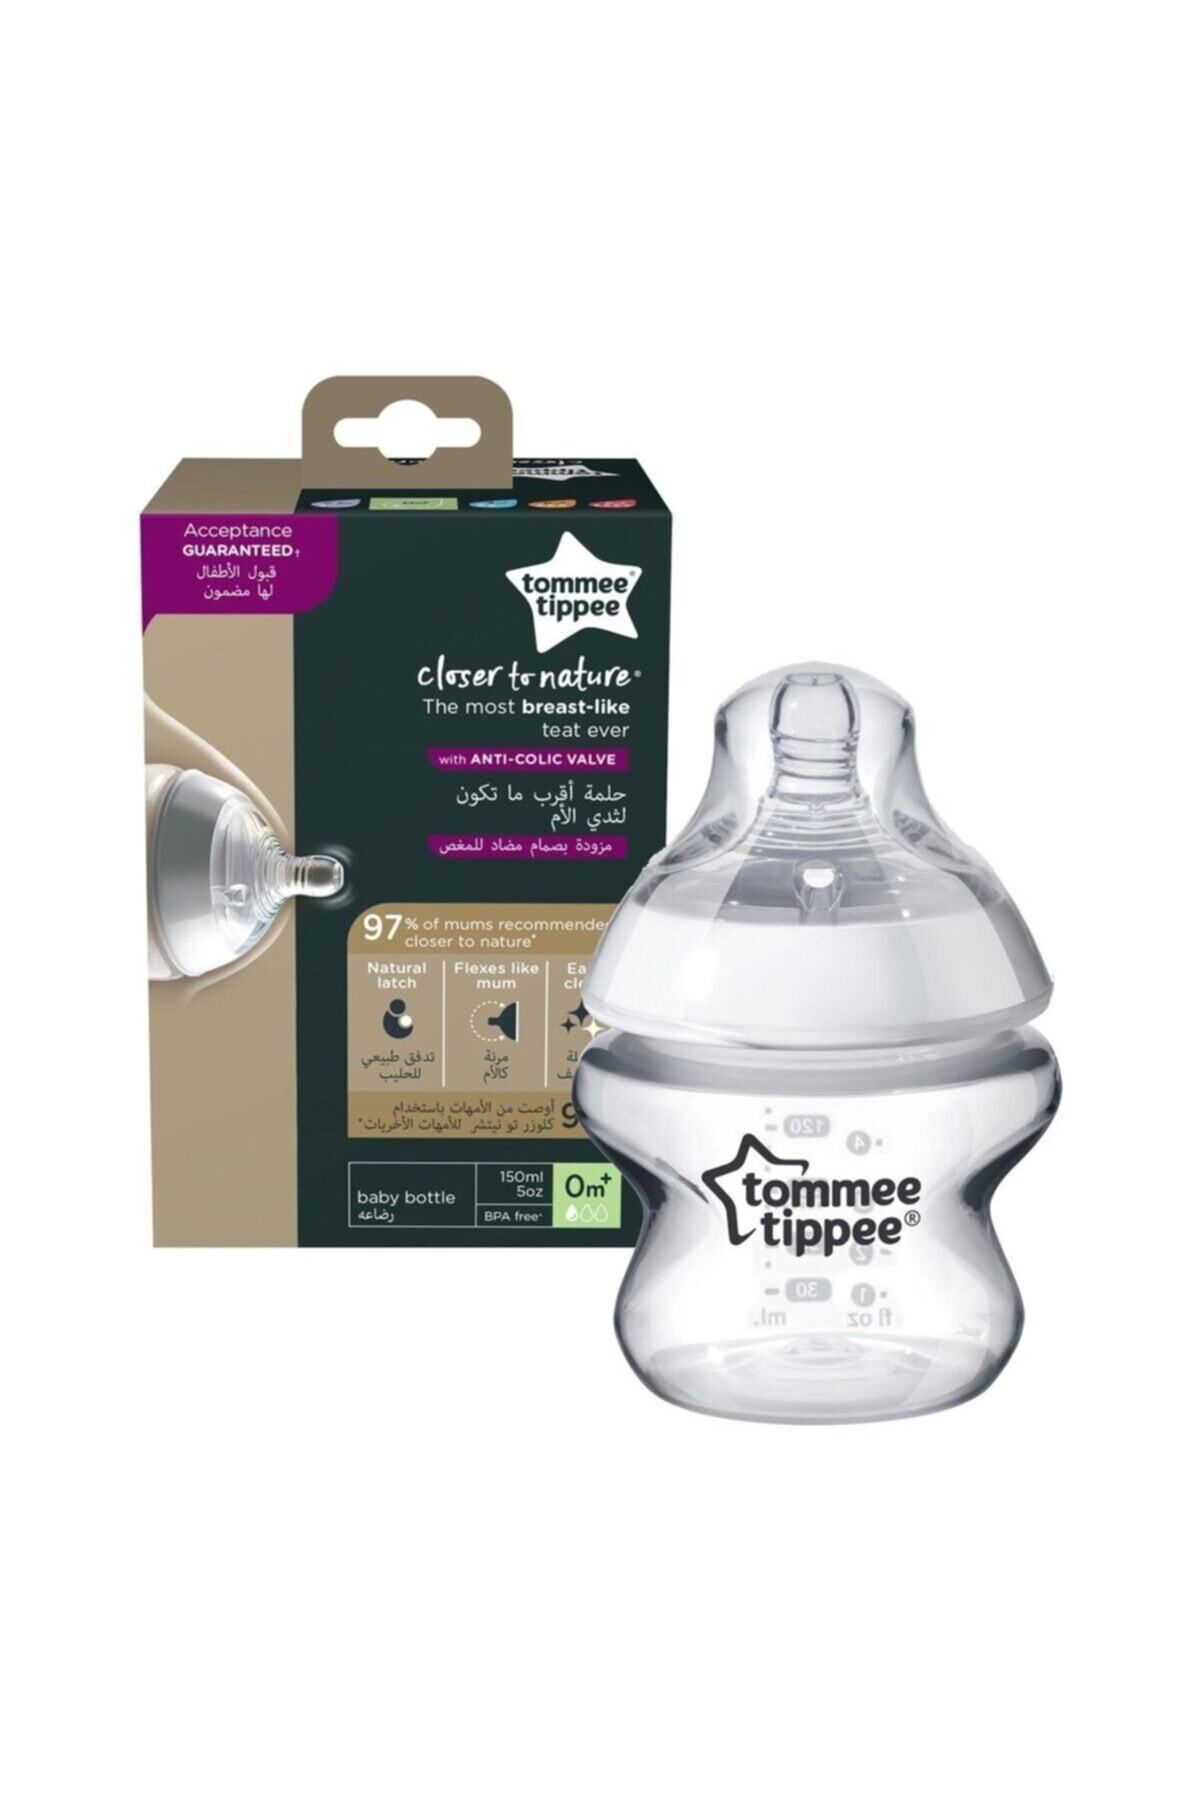 Tommee Tippee Pp Closer To Nature Biberon 150 ml